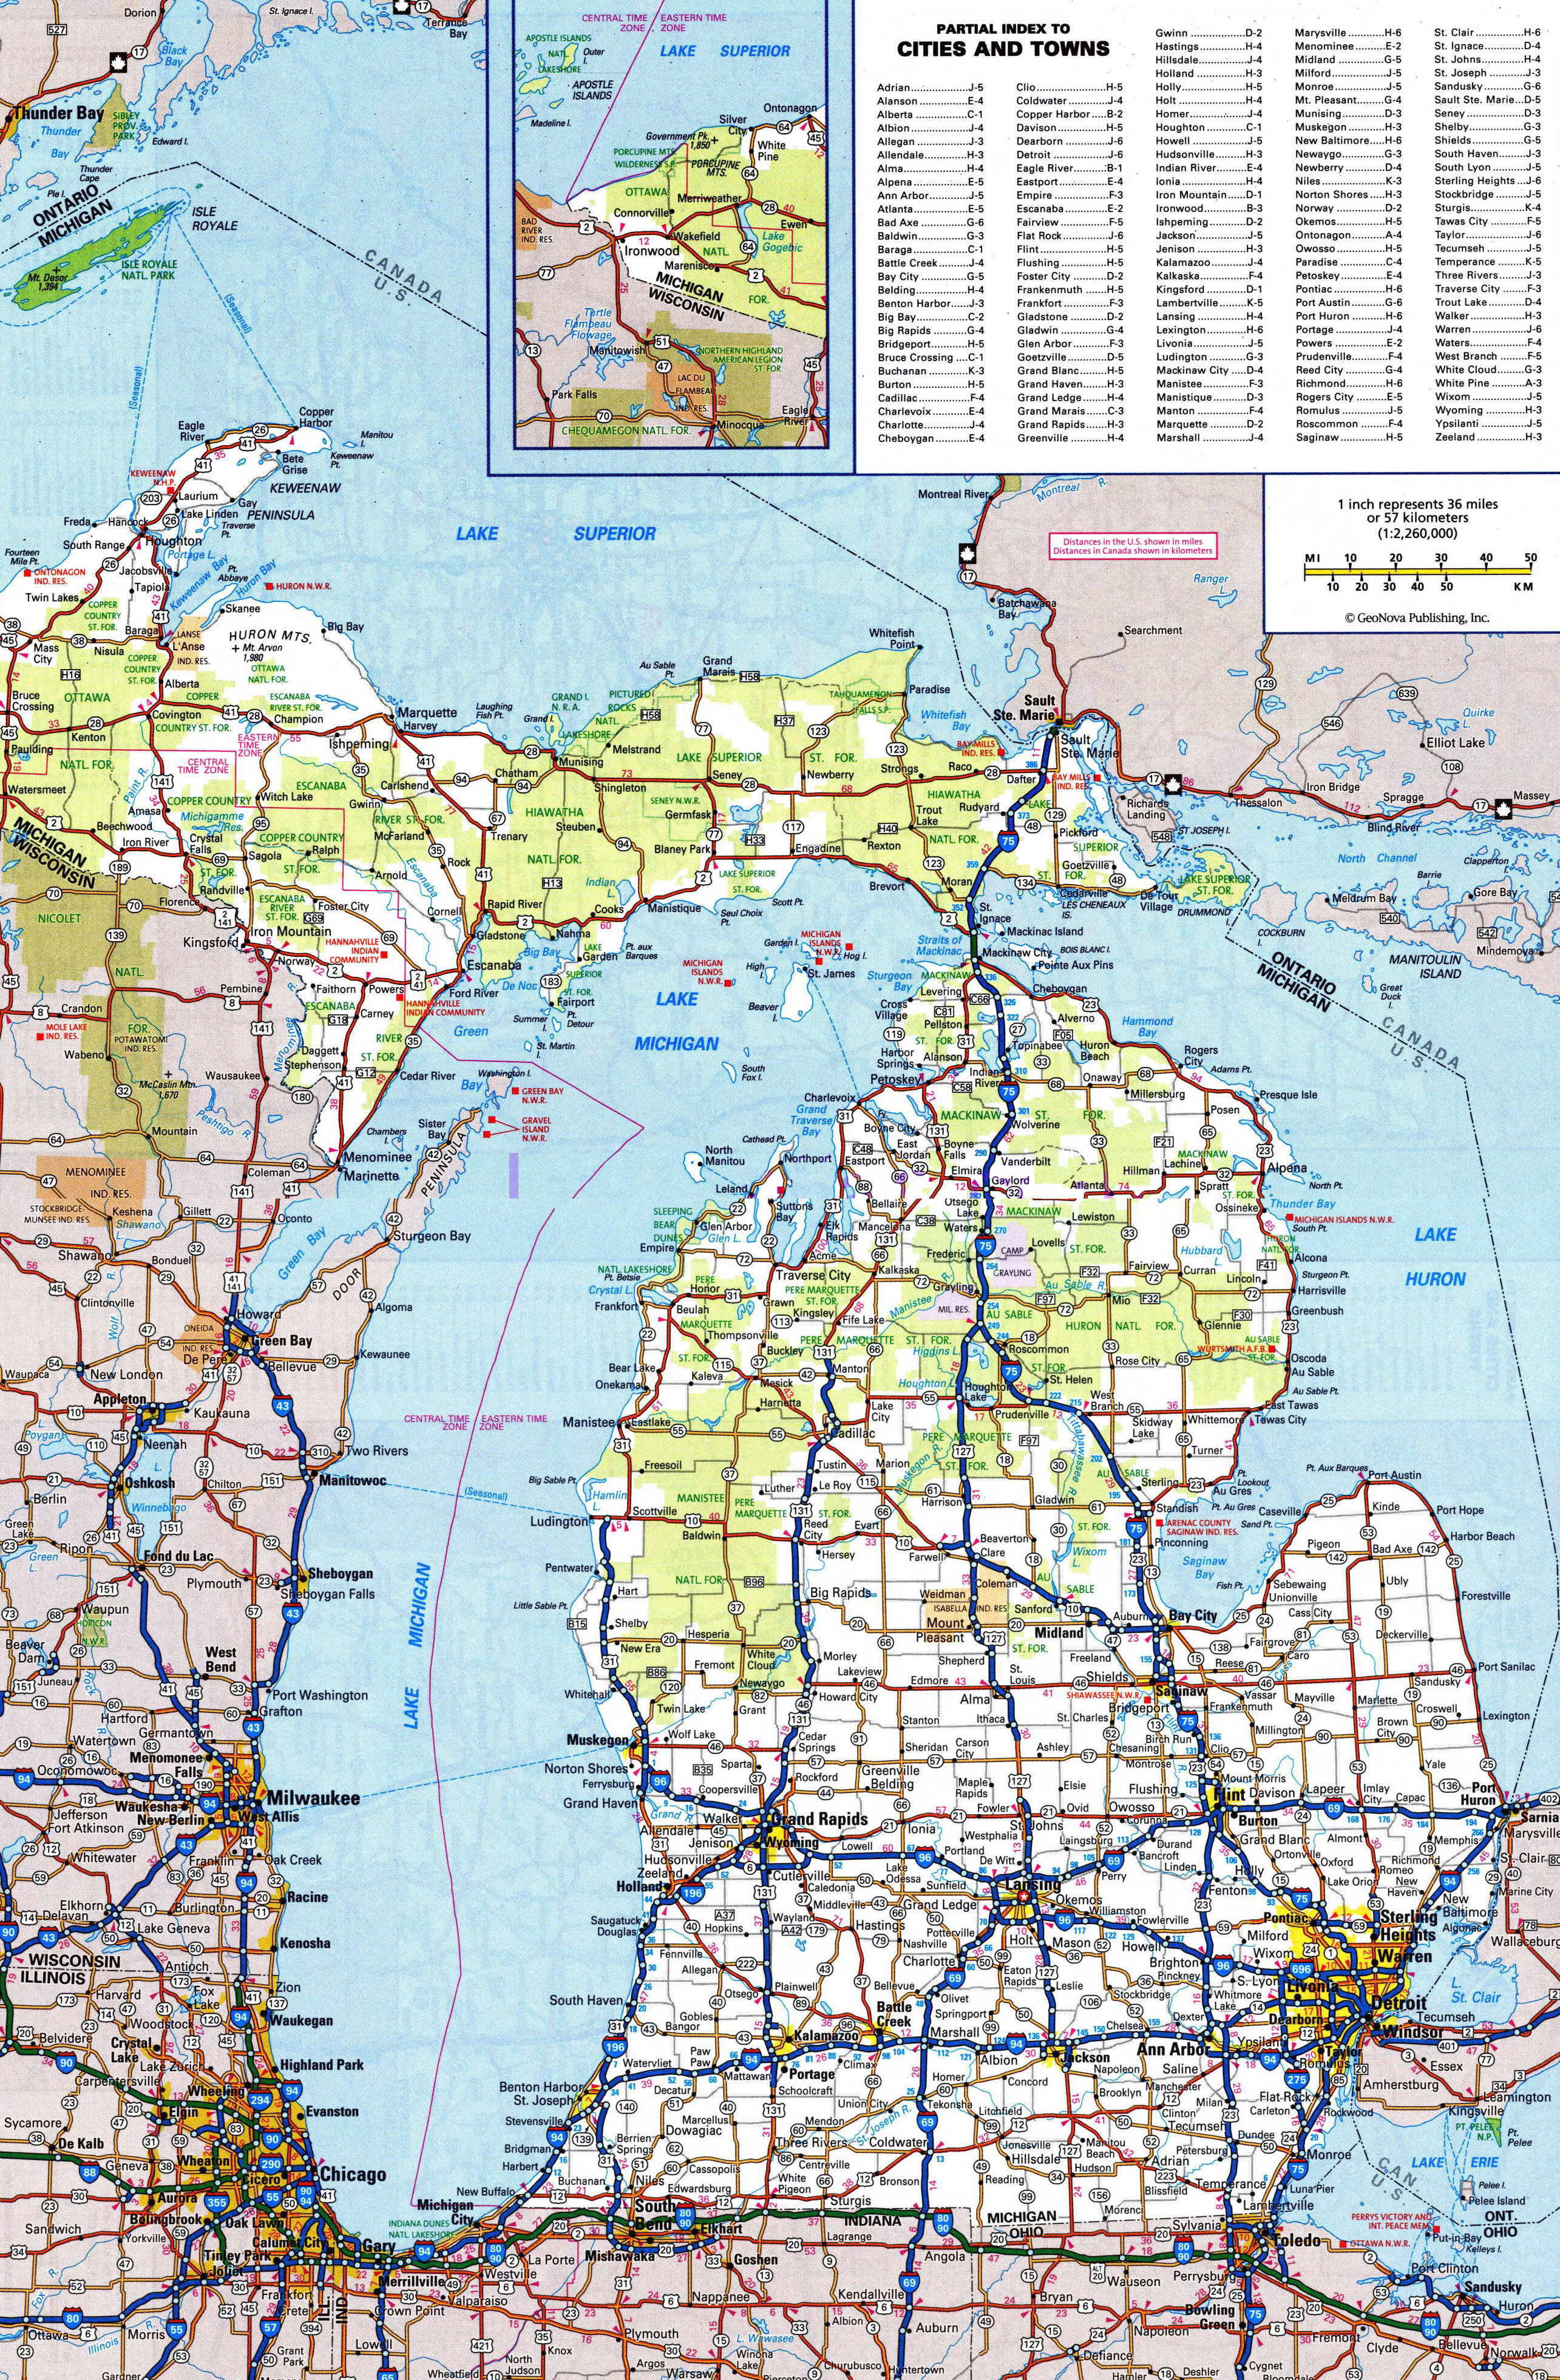 map-of-michigan-mi-cities-and-towns-printable-city-maps-the-best-porn